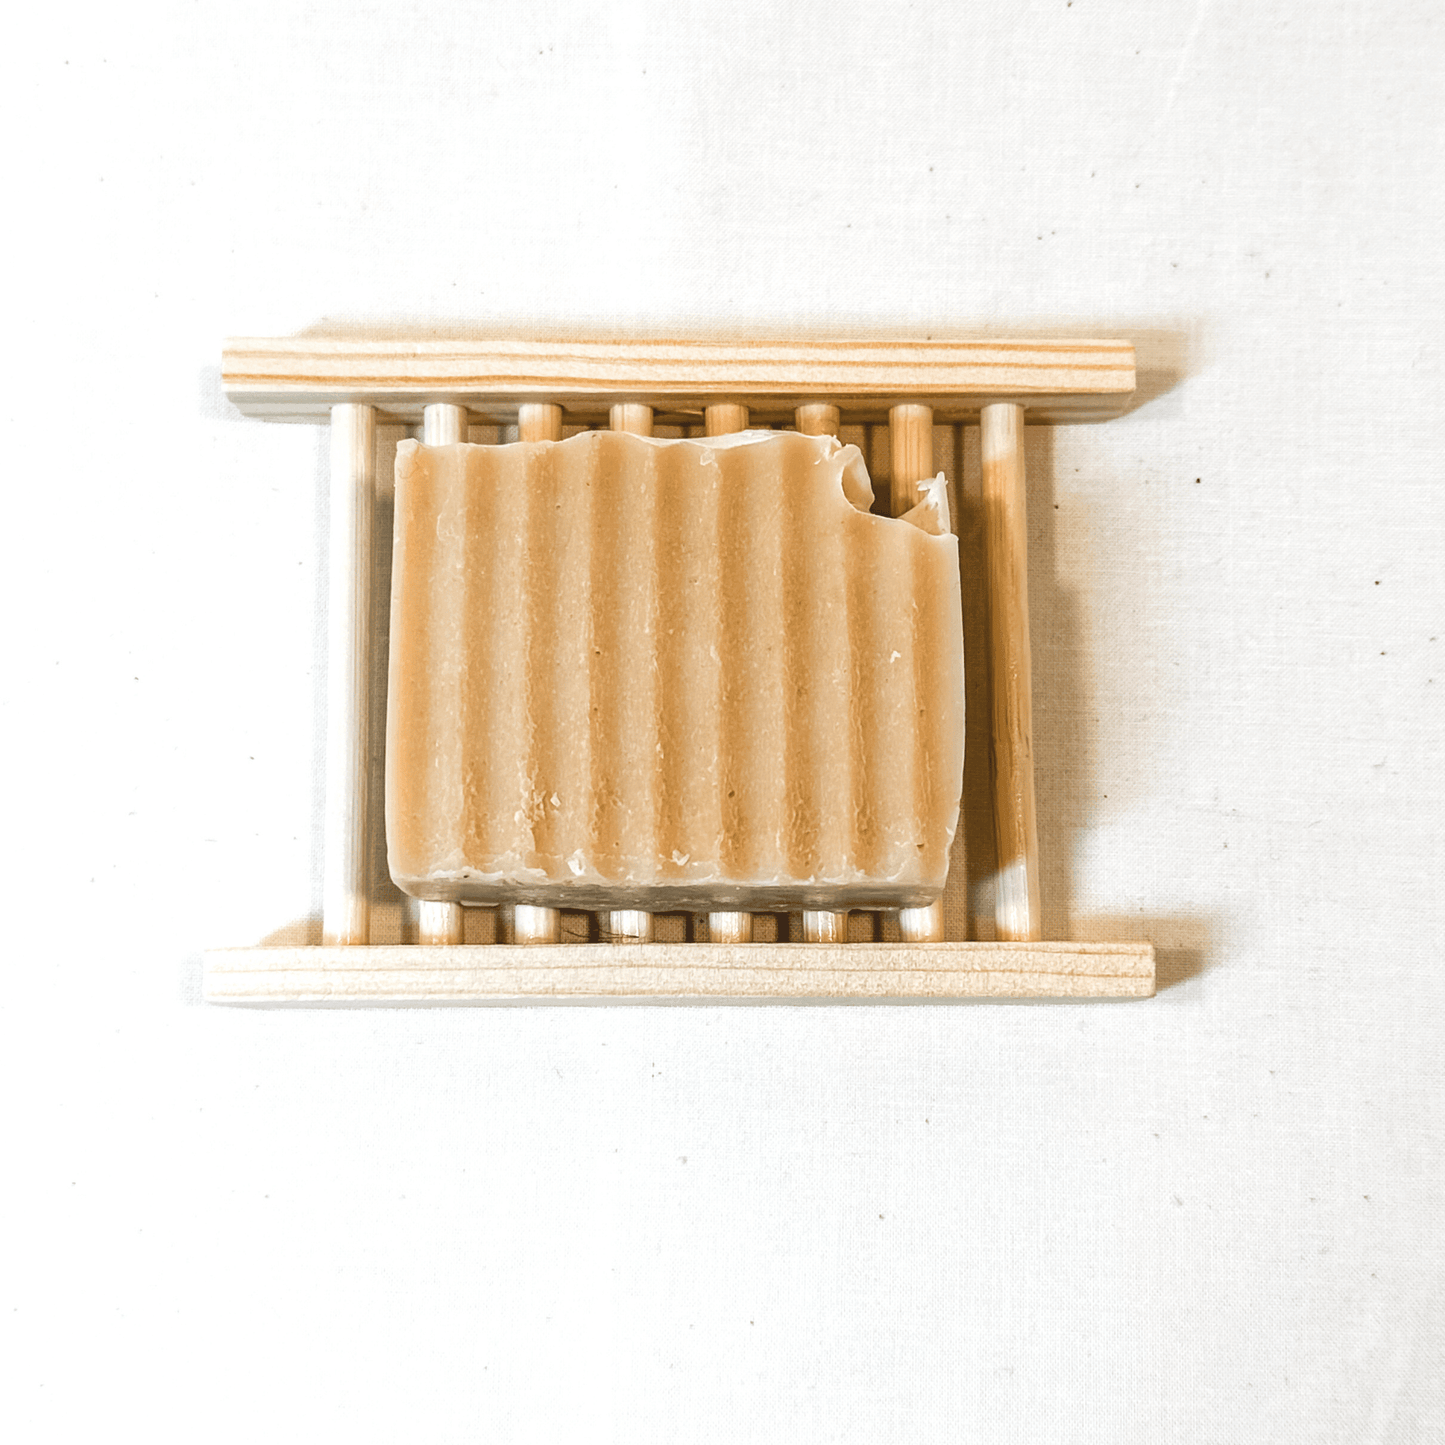 Fragrance free Goat's Milk Soap with bamboo soap tray